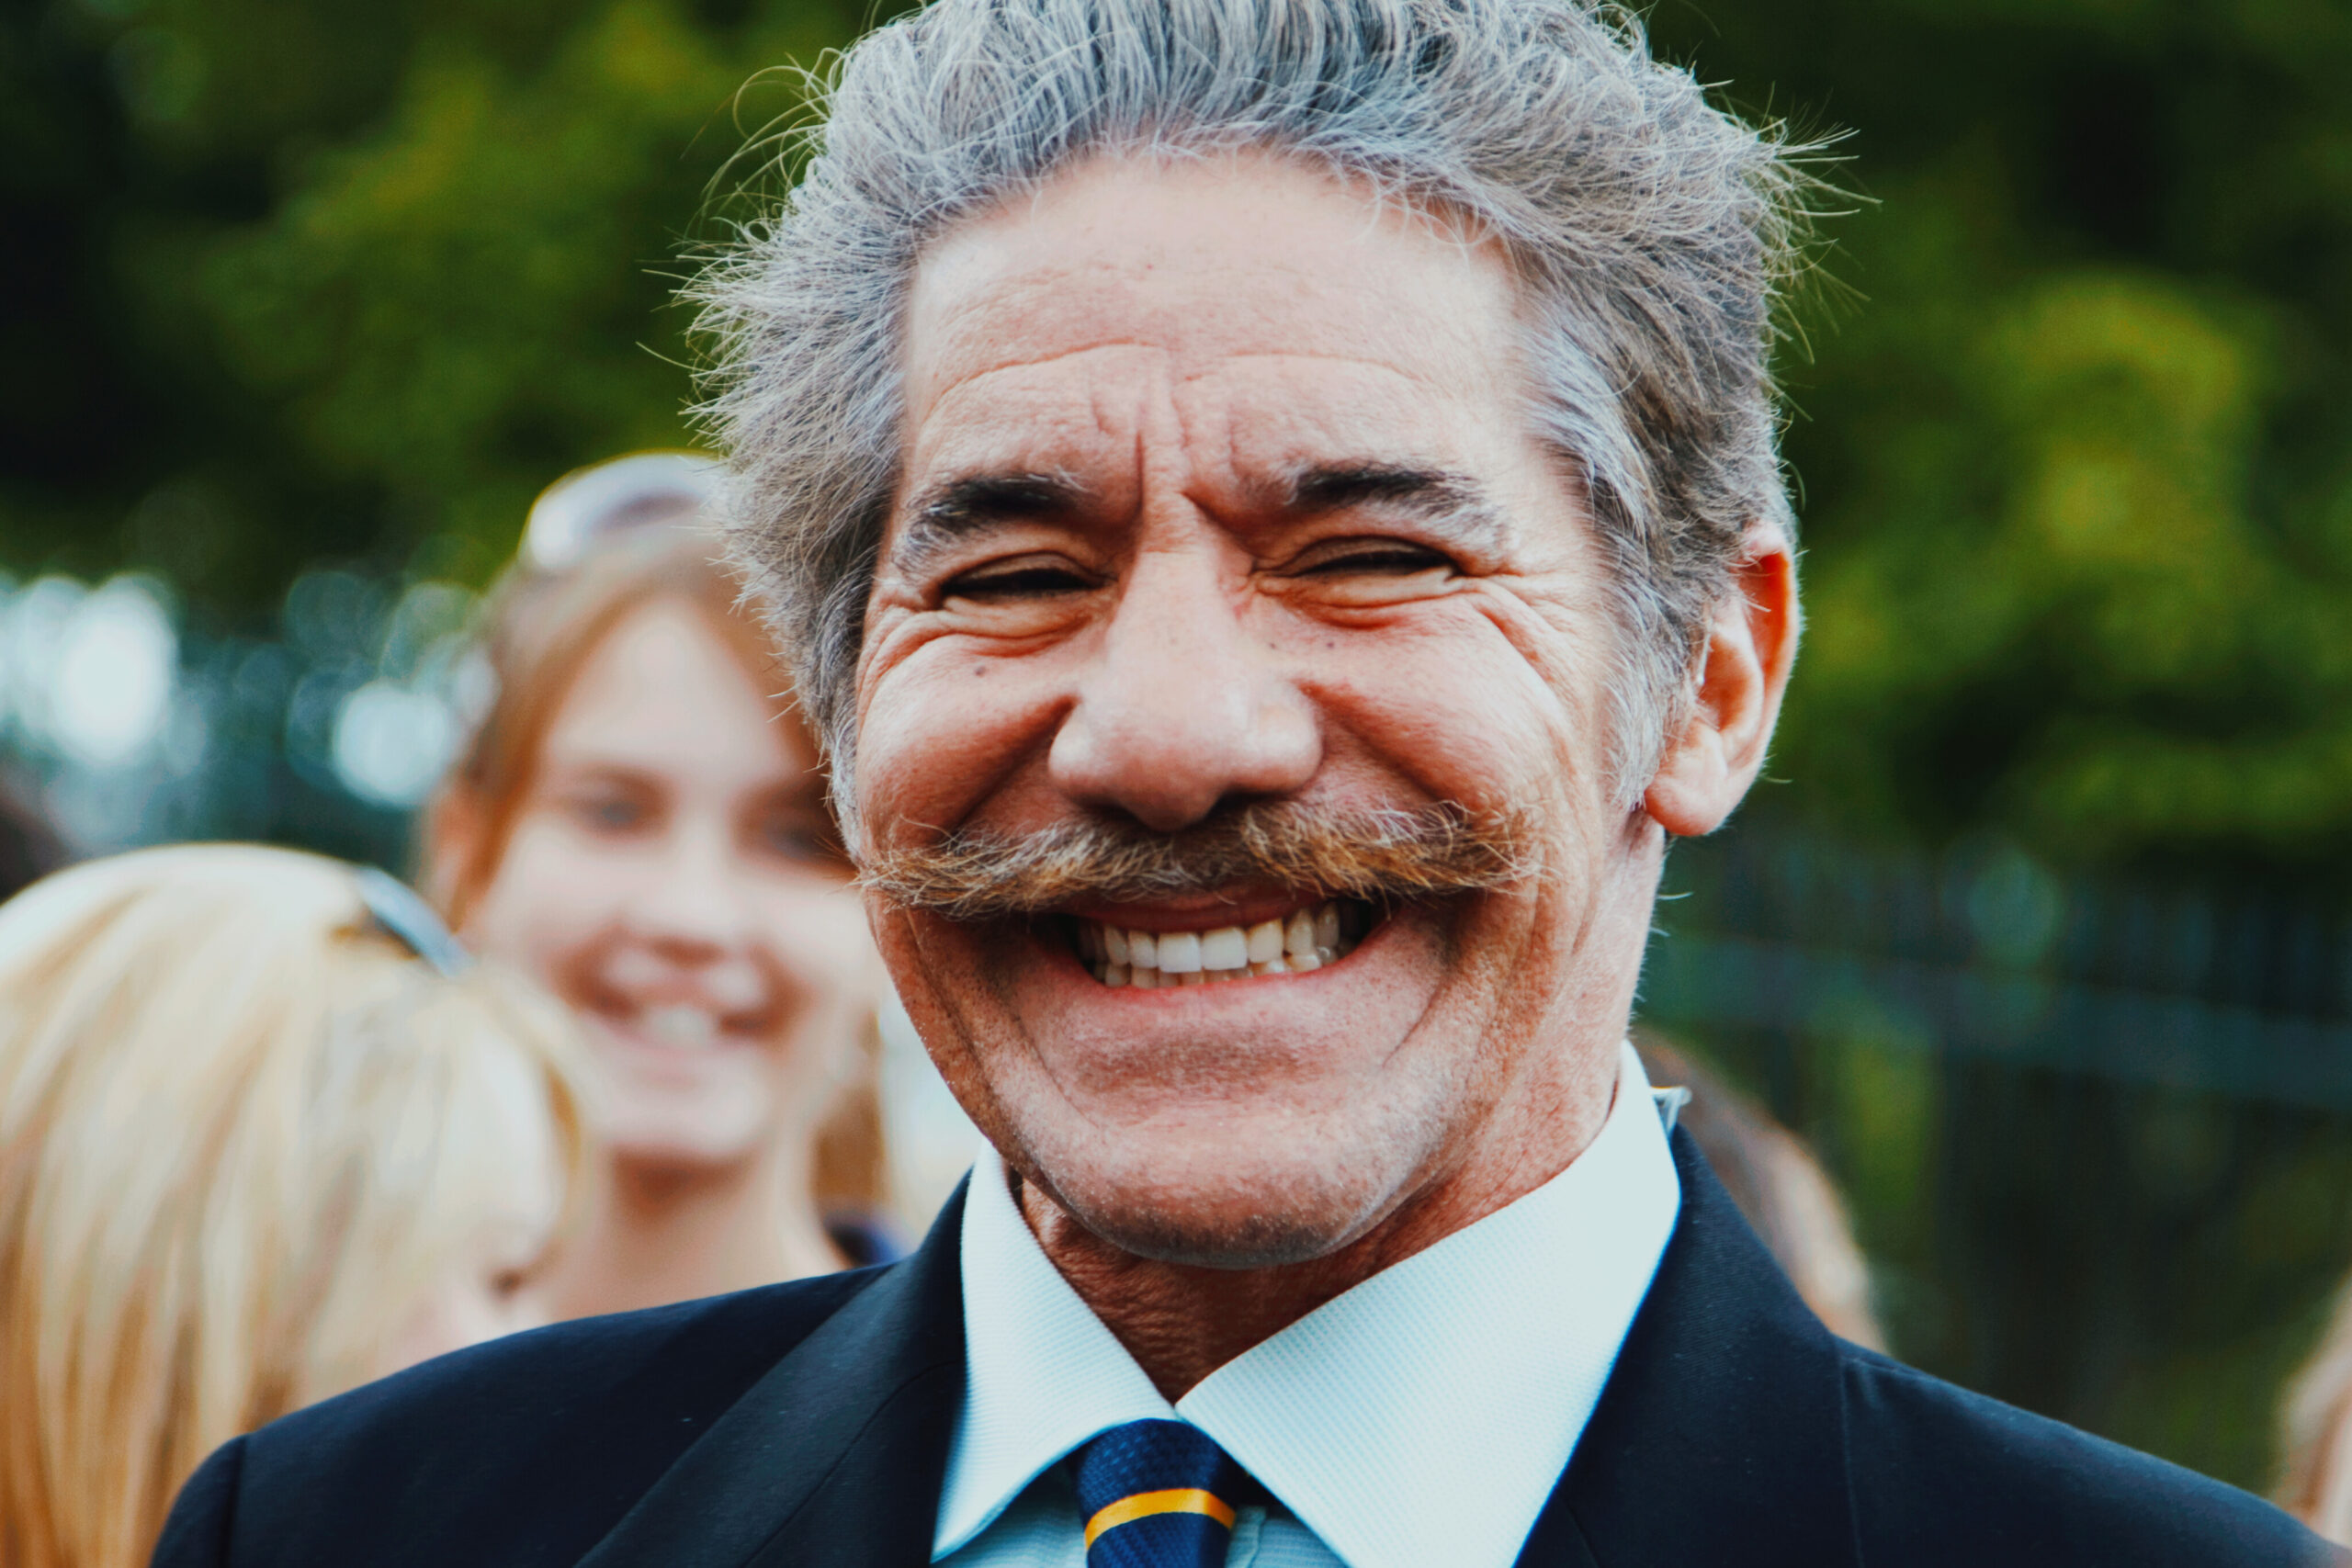 Geraldo Rivera Leaves News Association Following 23 Years: The Conclusion of an Important time period